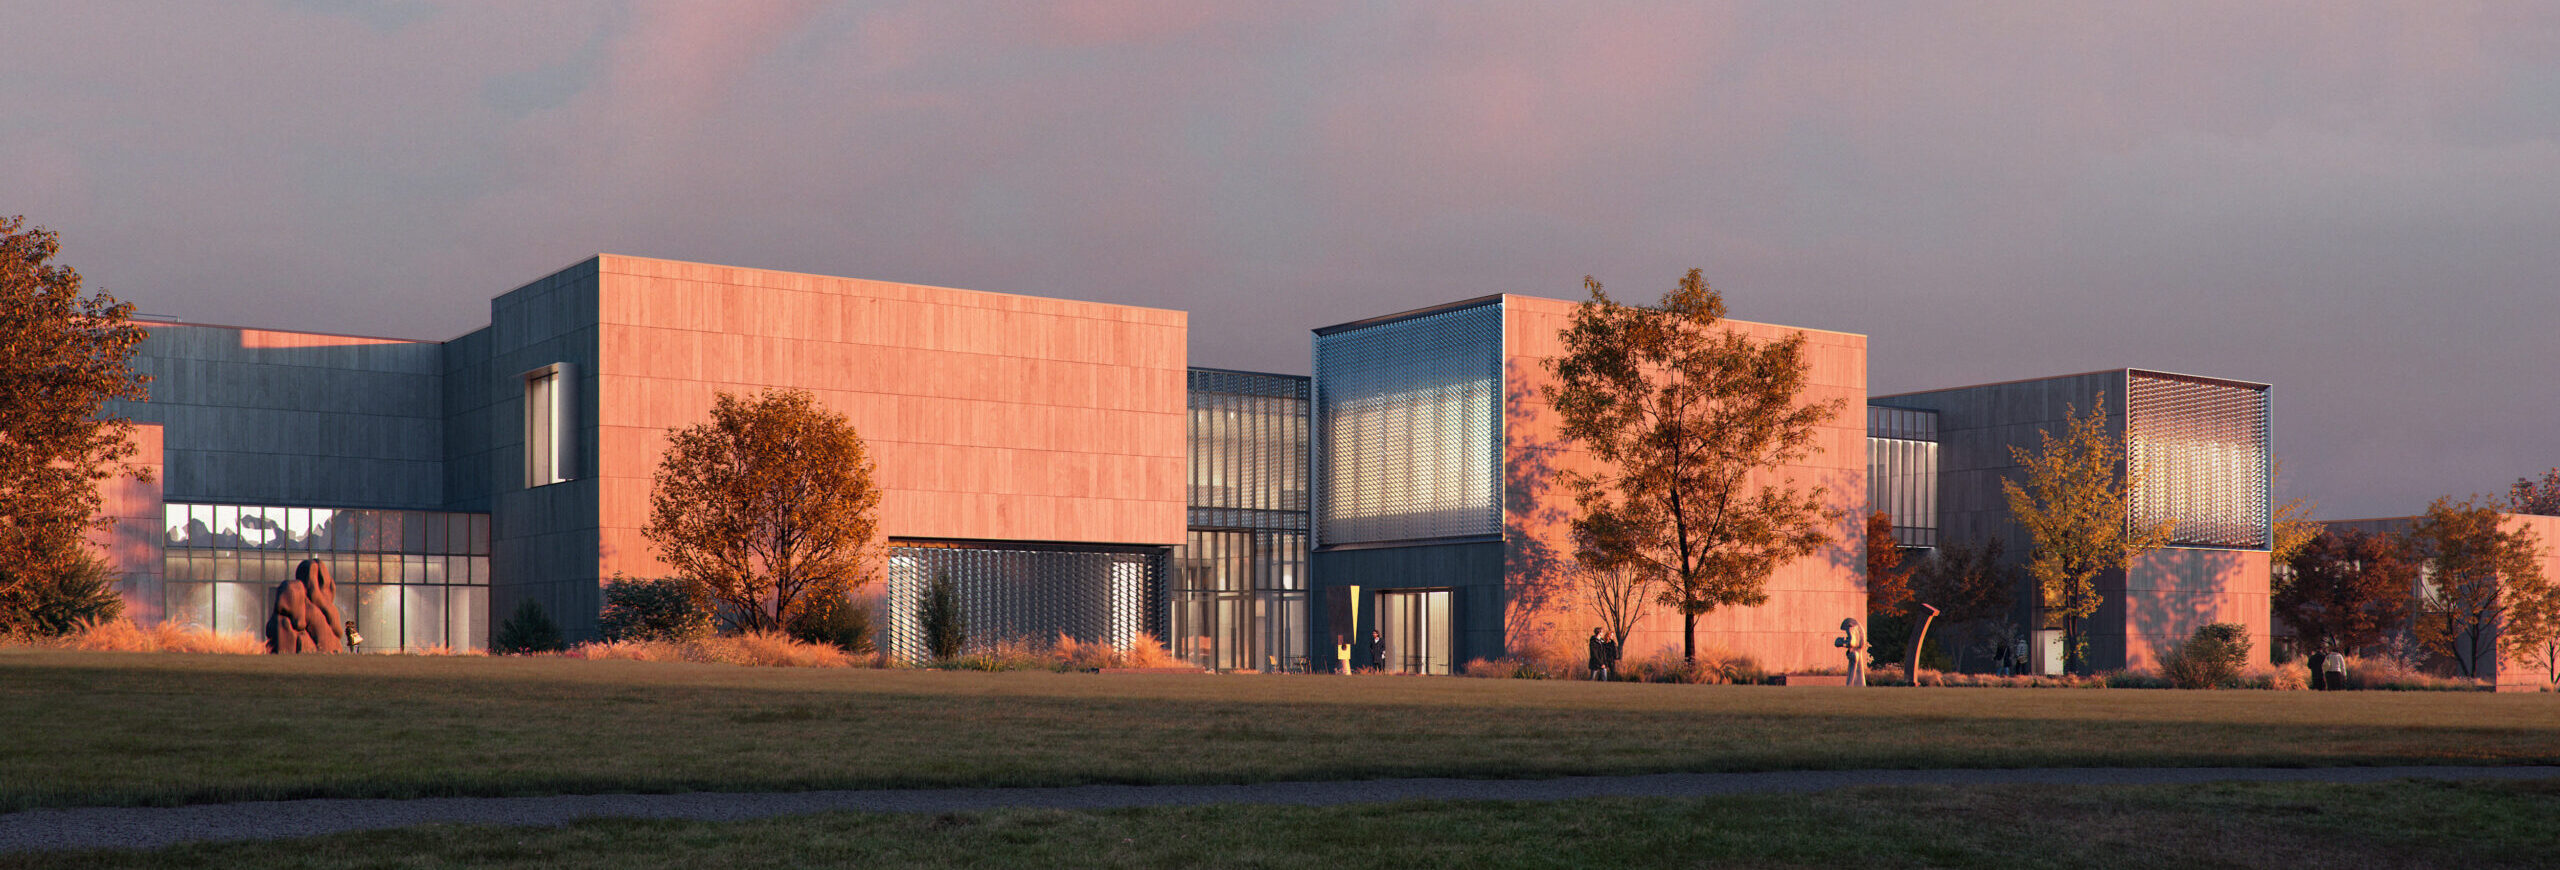 The new Palmer Museum of Art at Penn State. View from the Overlook Pavilion in the Arboretum. Architect: Allied Works. Rendering: Courtesy of MIR.